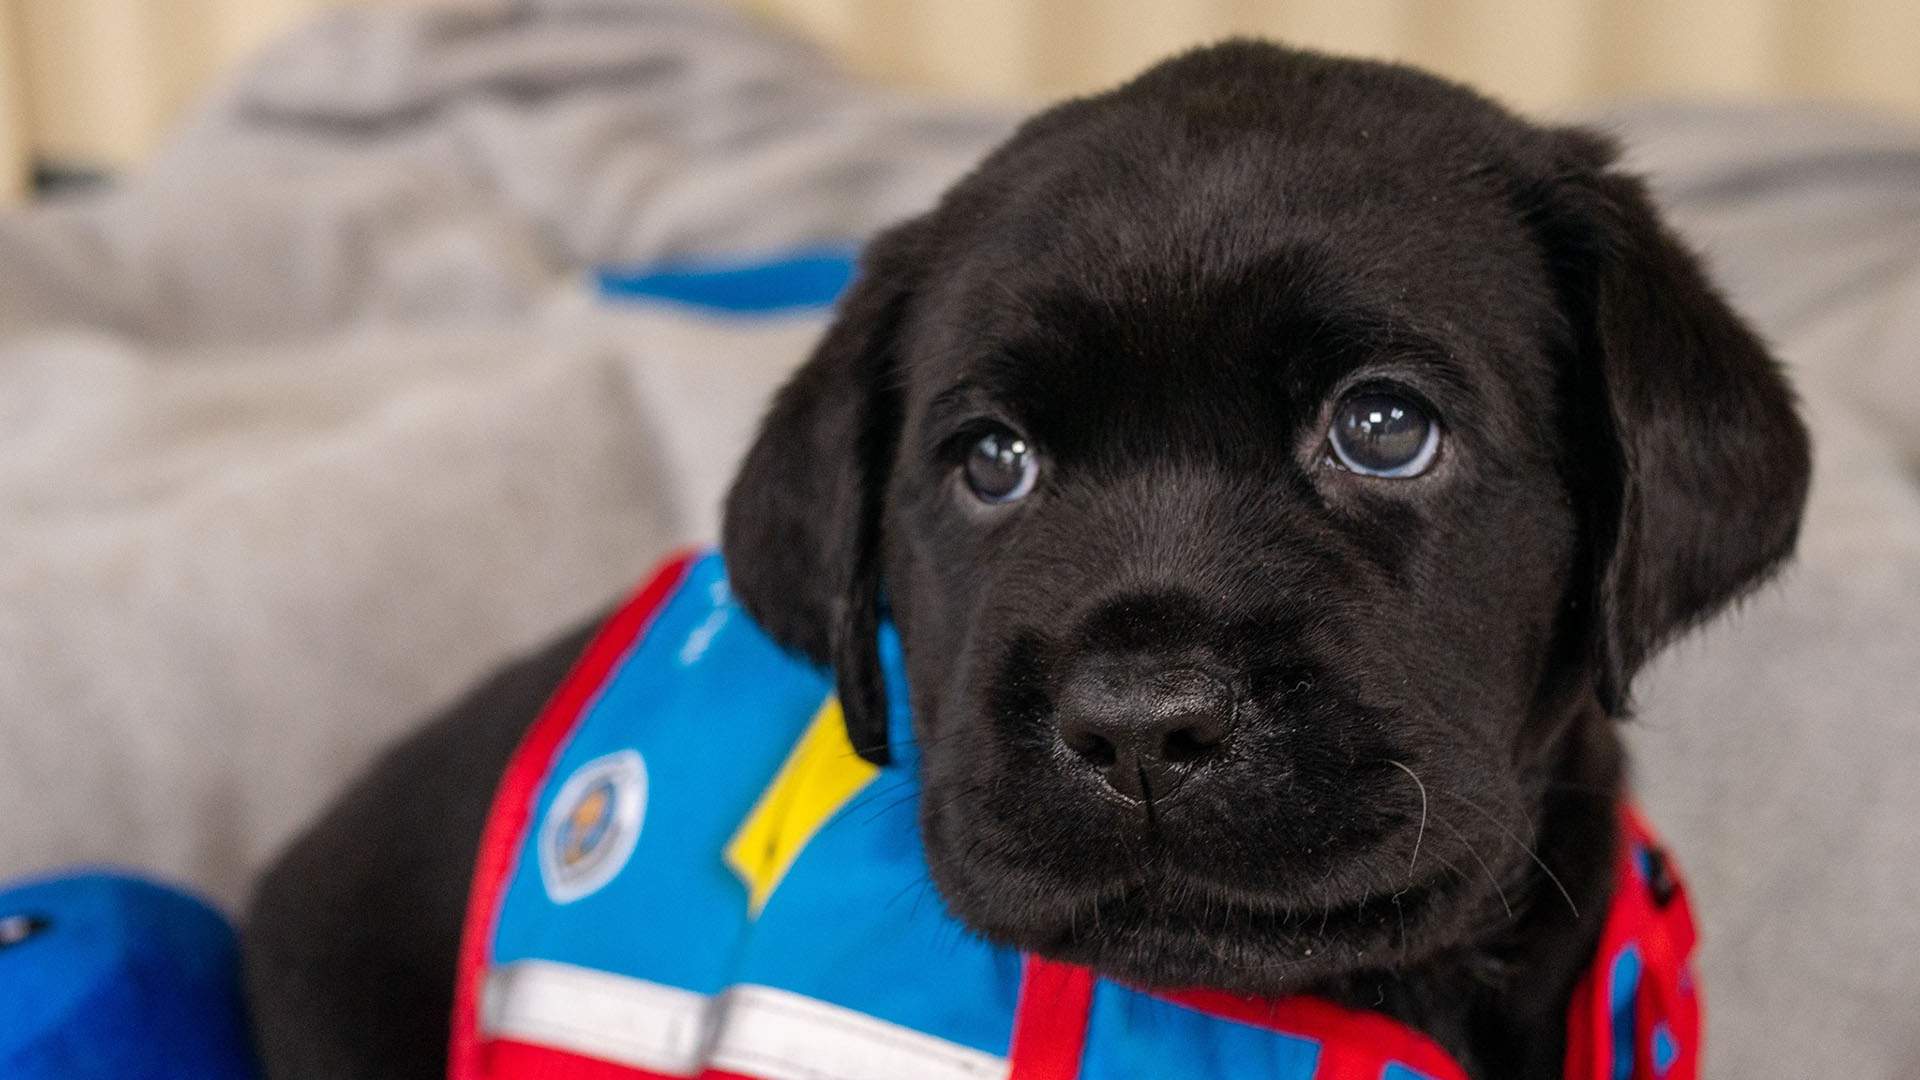 Assistance Dogs Australia Needs You to Look After These Fresh New Pups